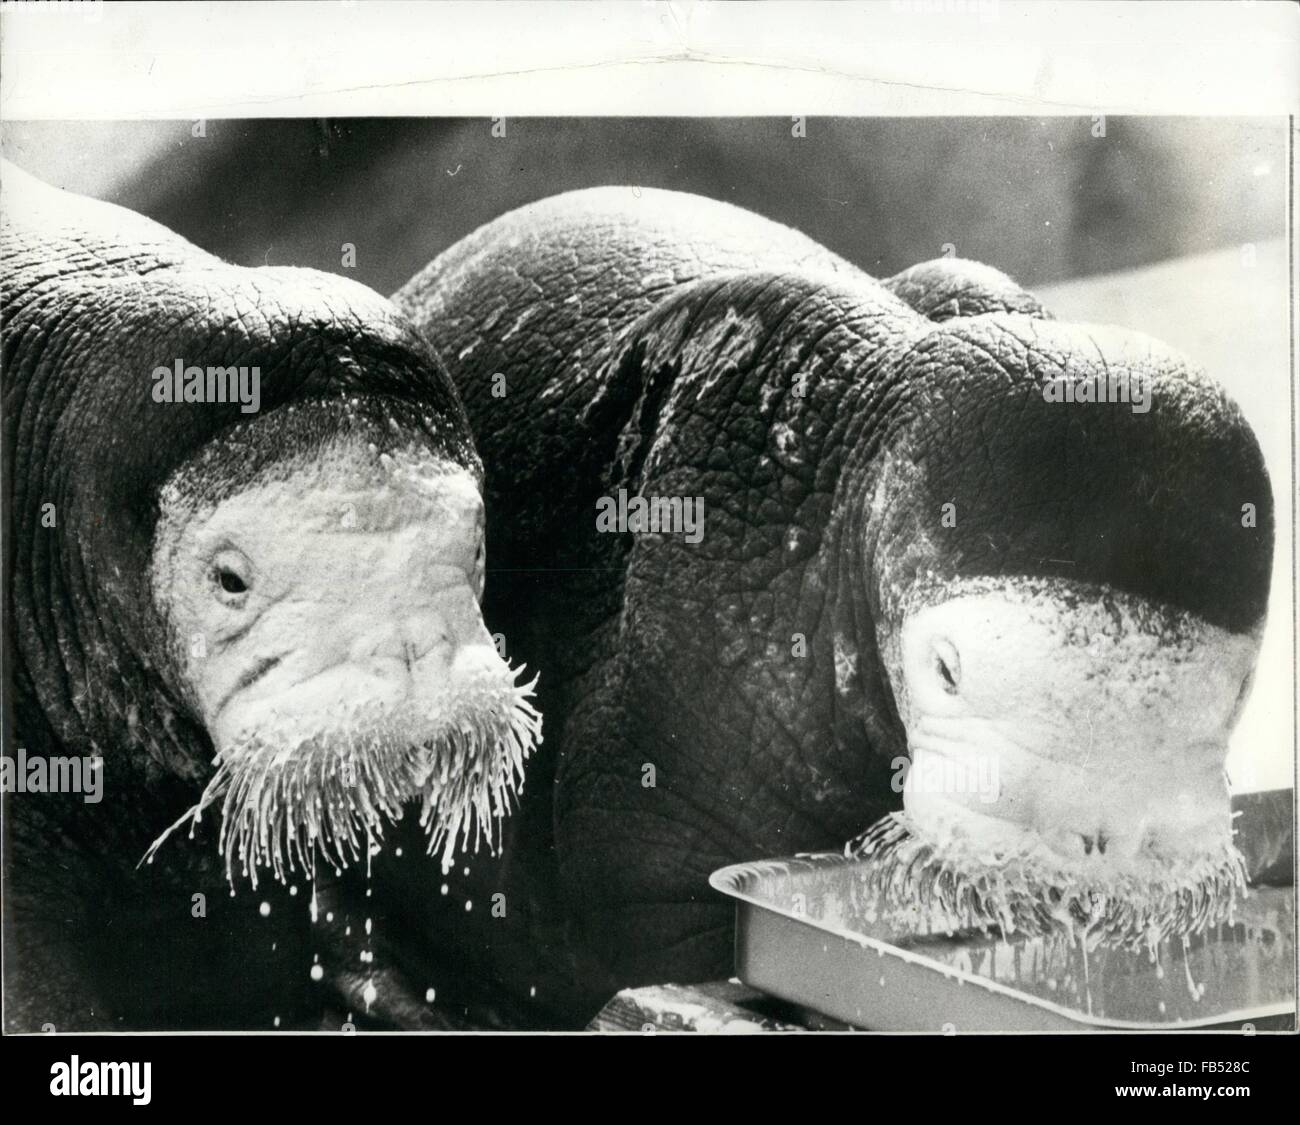 1968 - Latest In Beauty Treatment. Latest thing in facial pancake makeup must be this beauty treatment seen being self-administered by these two young walruses at Marineland of the Pacific, California. Actually, the formula is designed to line the walls of the walruses' stomach, so the hungry young rascals enjoy tucking in right up to their eyes. The ''makeup'' is a tasty mixture of extra thick double creme, vitamins, eggs, ground clams and cod liver oil. Photo Shows: Young walruses up to their ears in formula. © Keystone Pictures USA/ZUMAPRESS.com/Alamy Live News Stock Photo